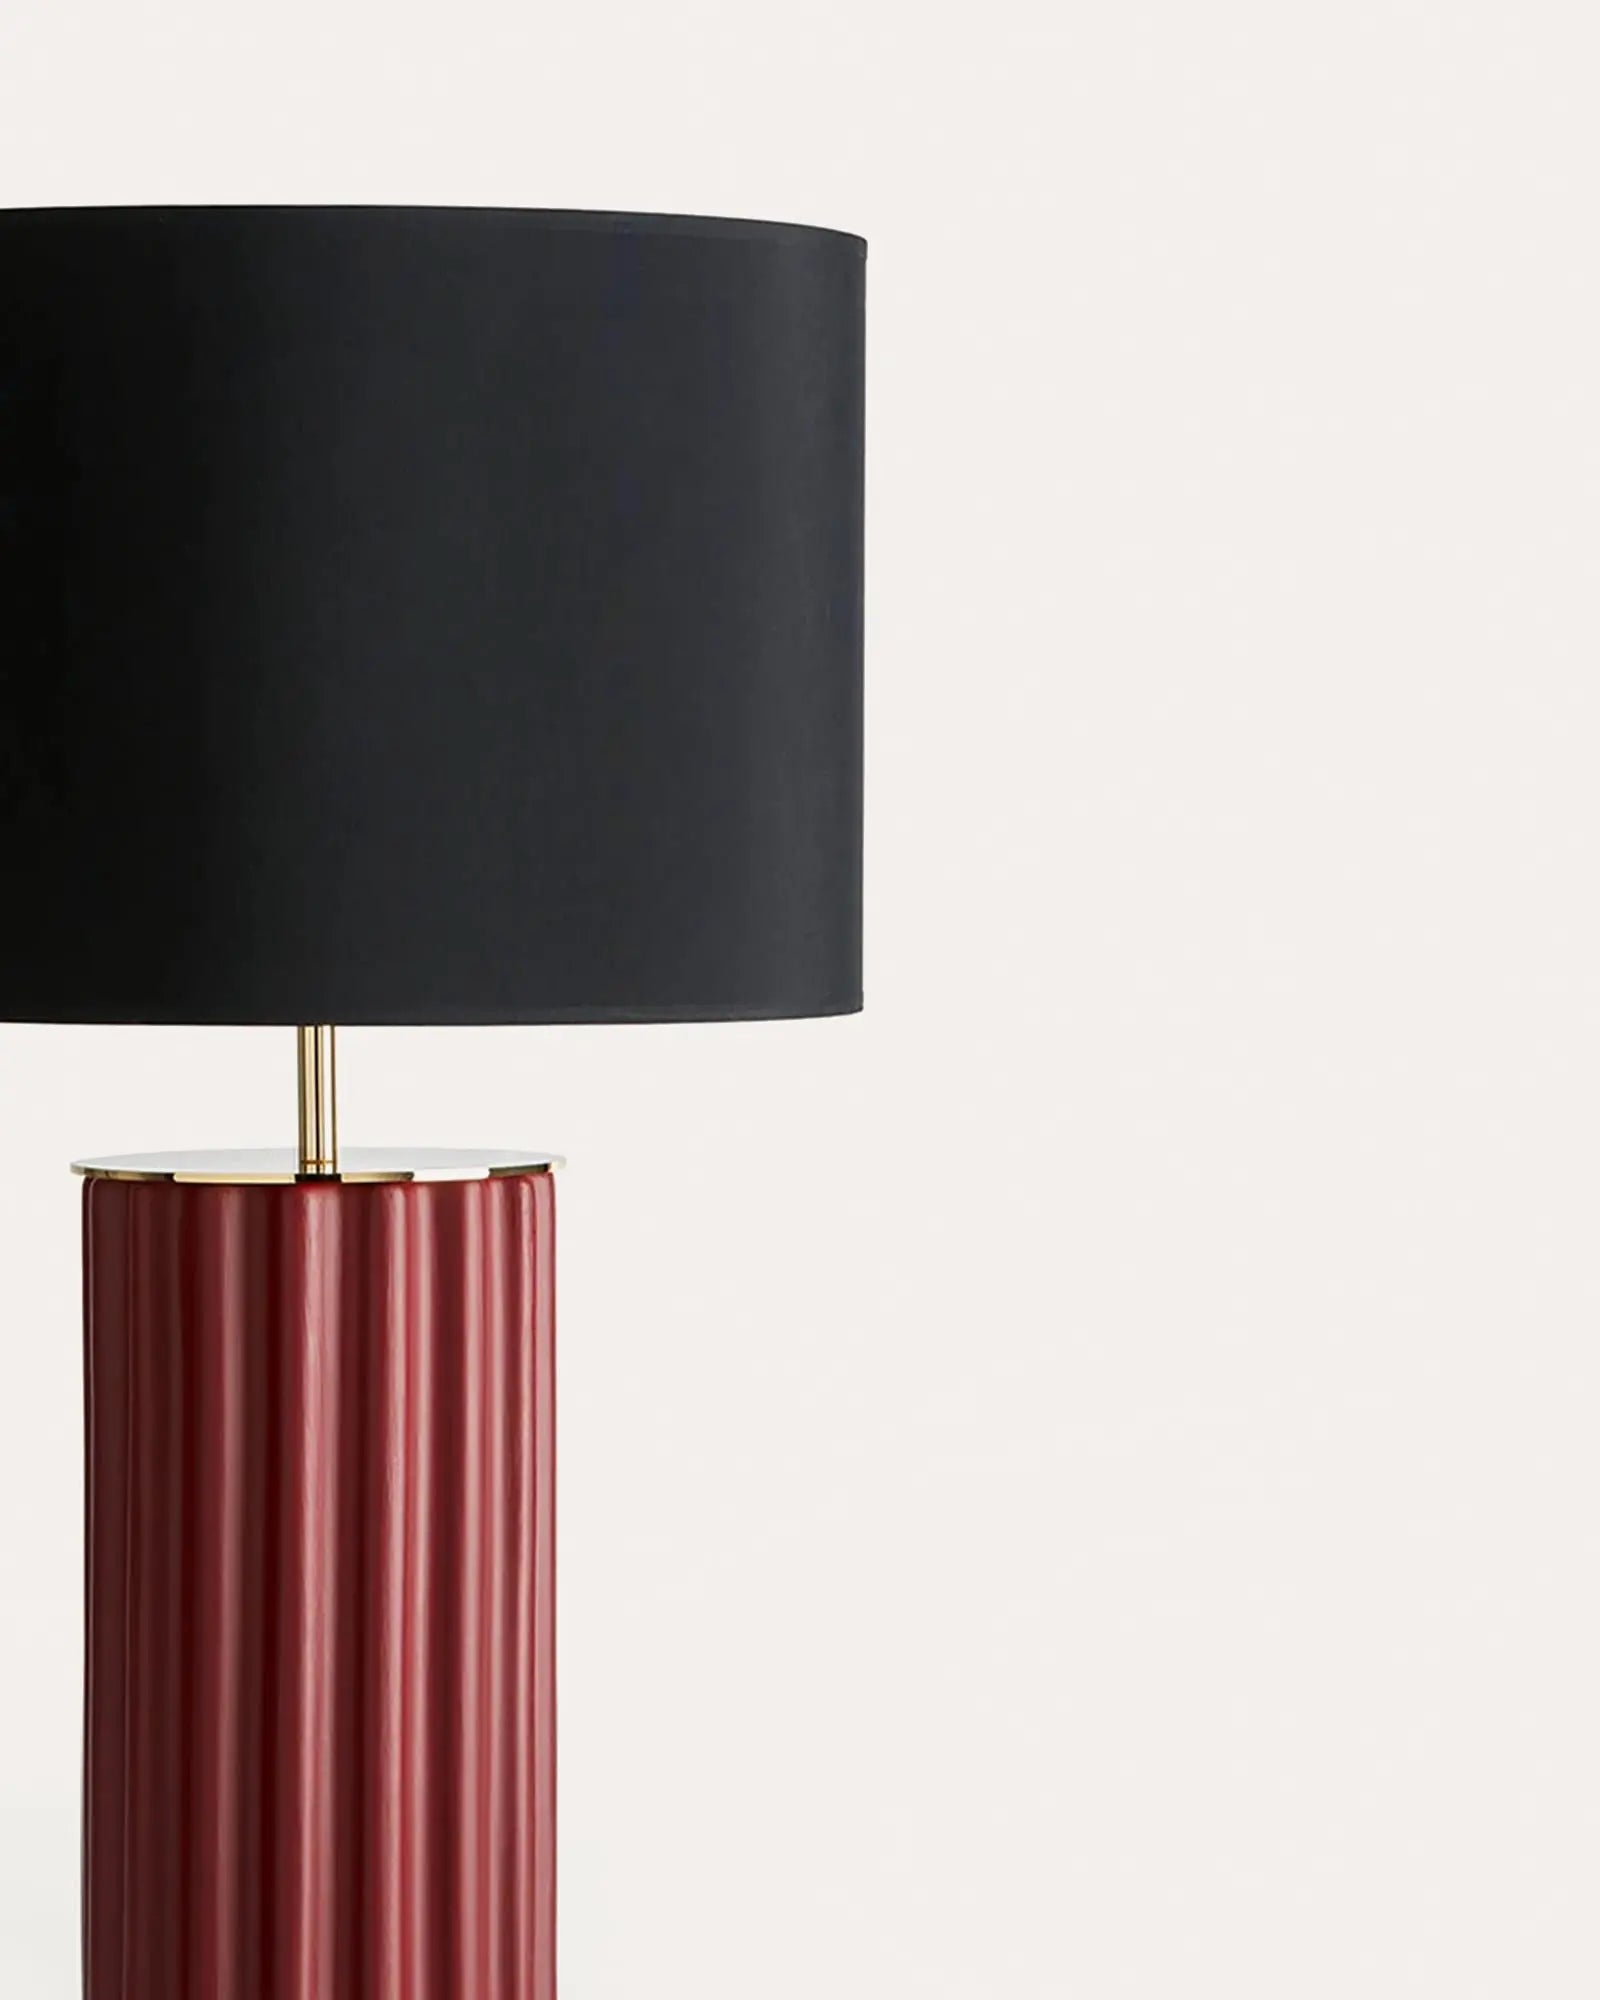 Sonica decorative contemporary ceramic and black fabric table lamp detail